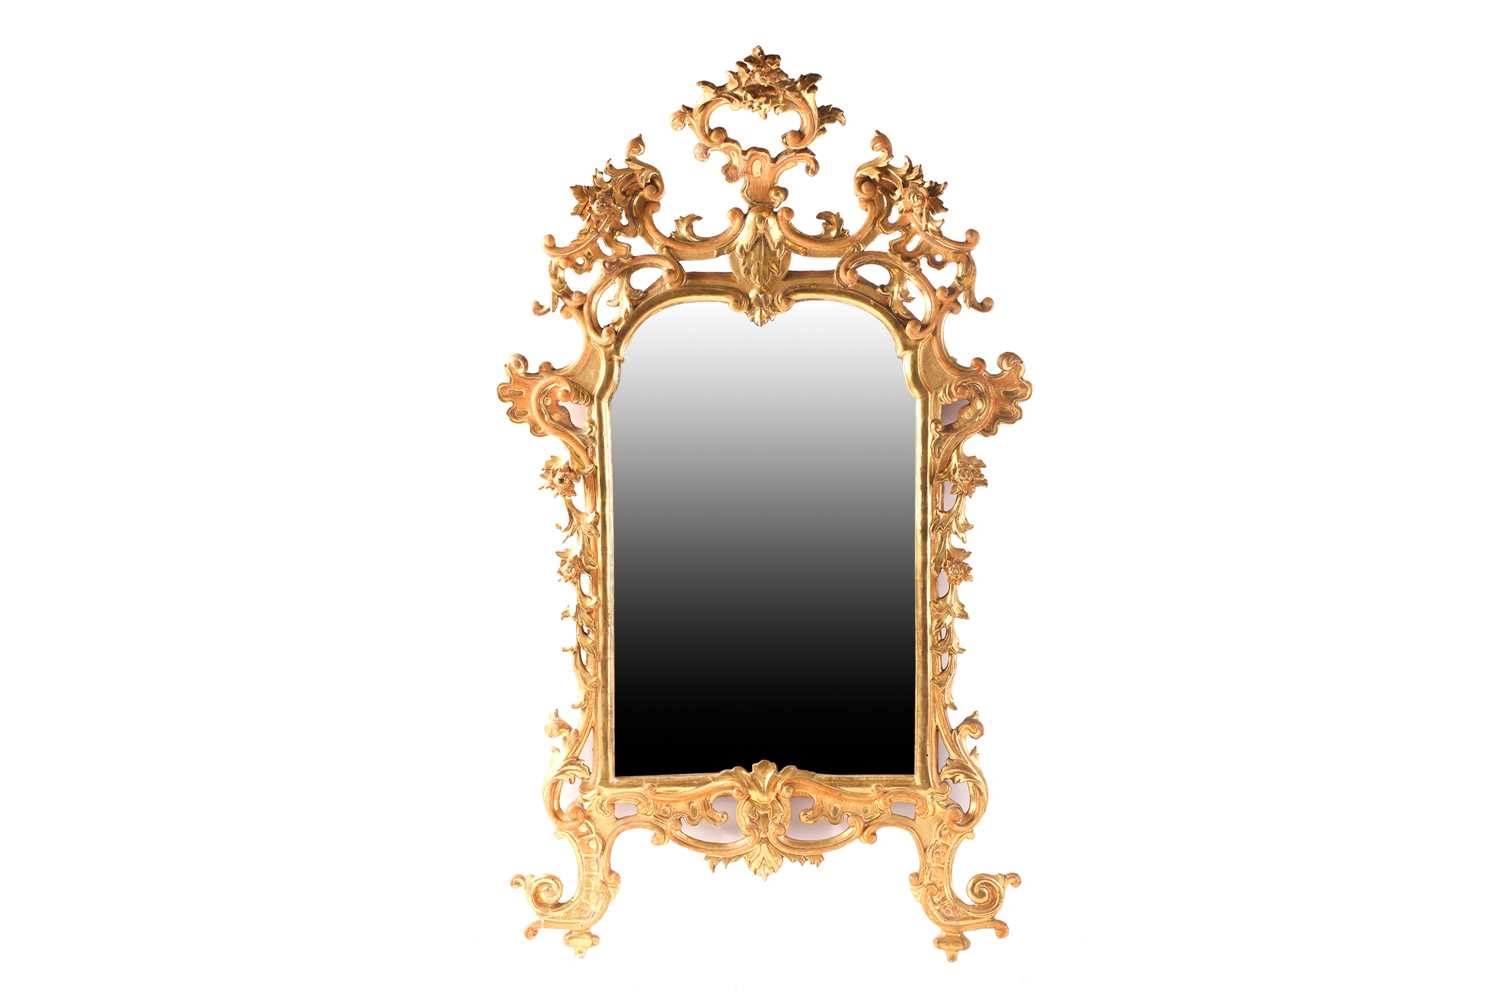 An 18th-century style Italian Piedmont style carved wood and gilt gesso arch-topped wall mirror,